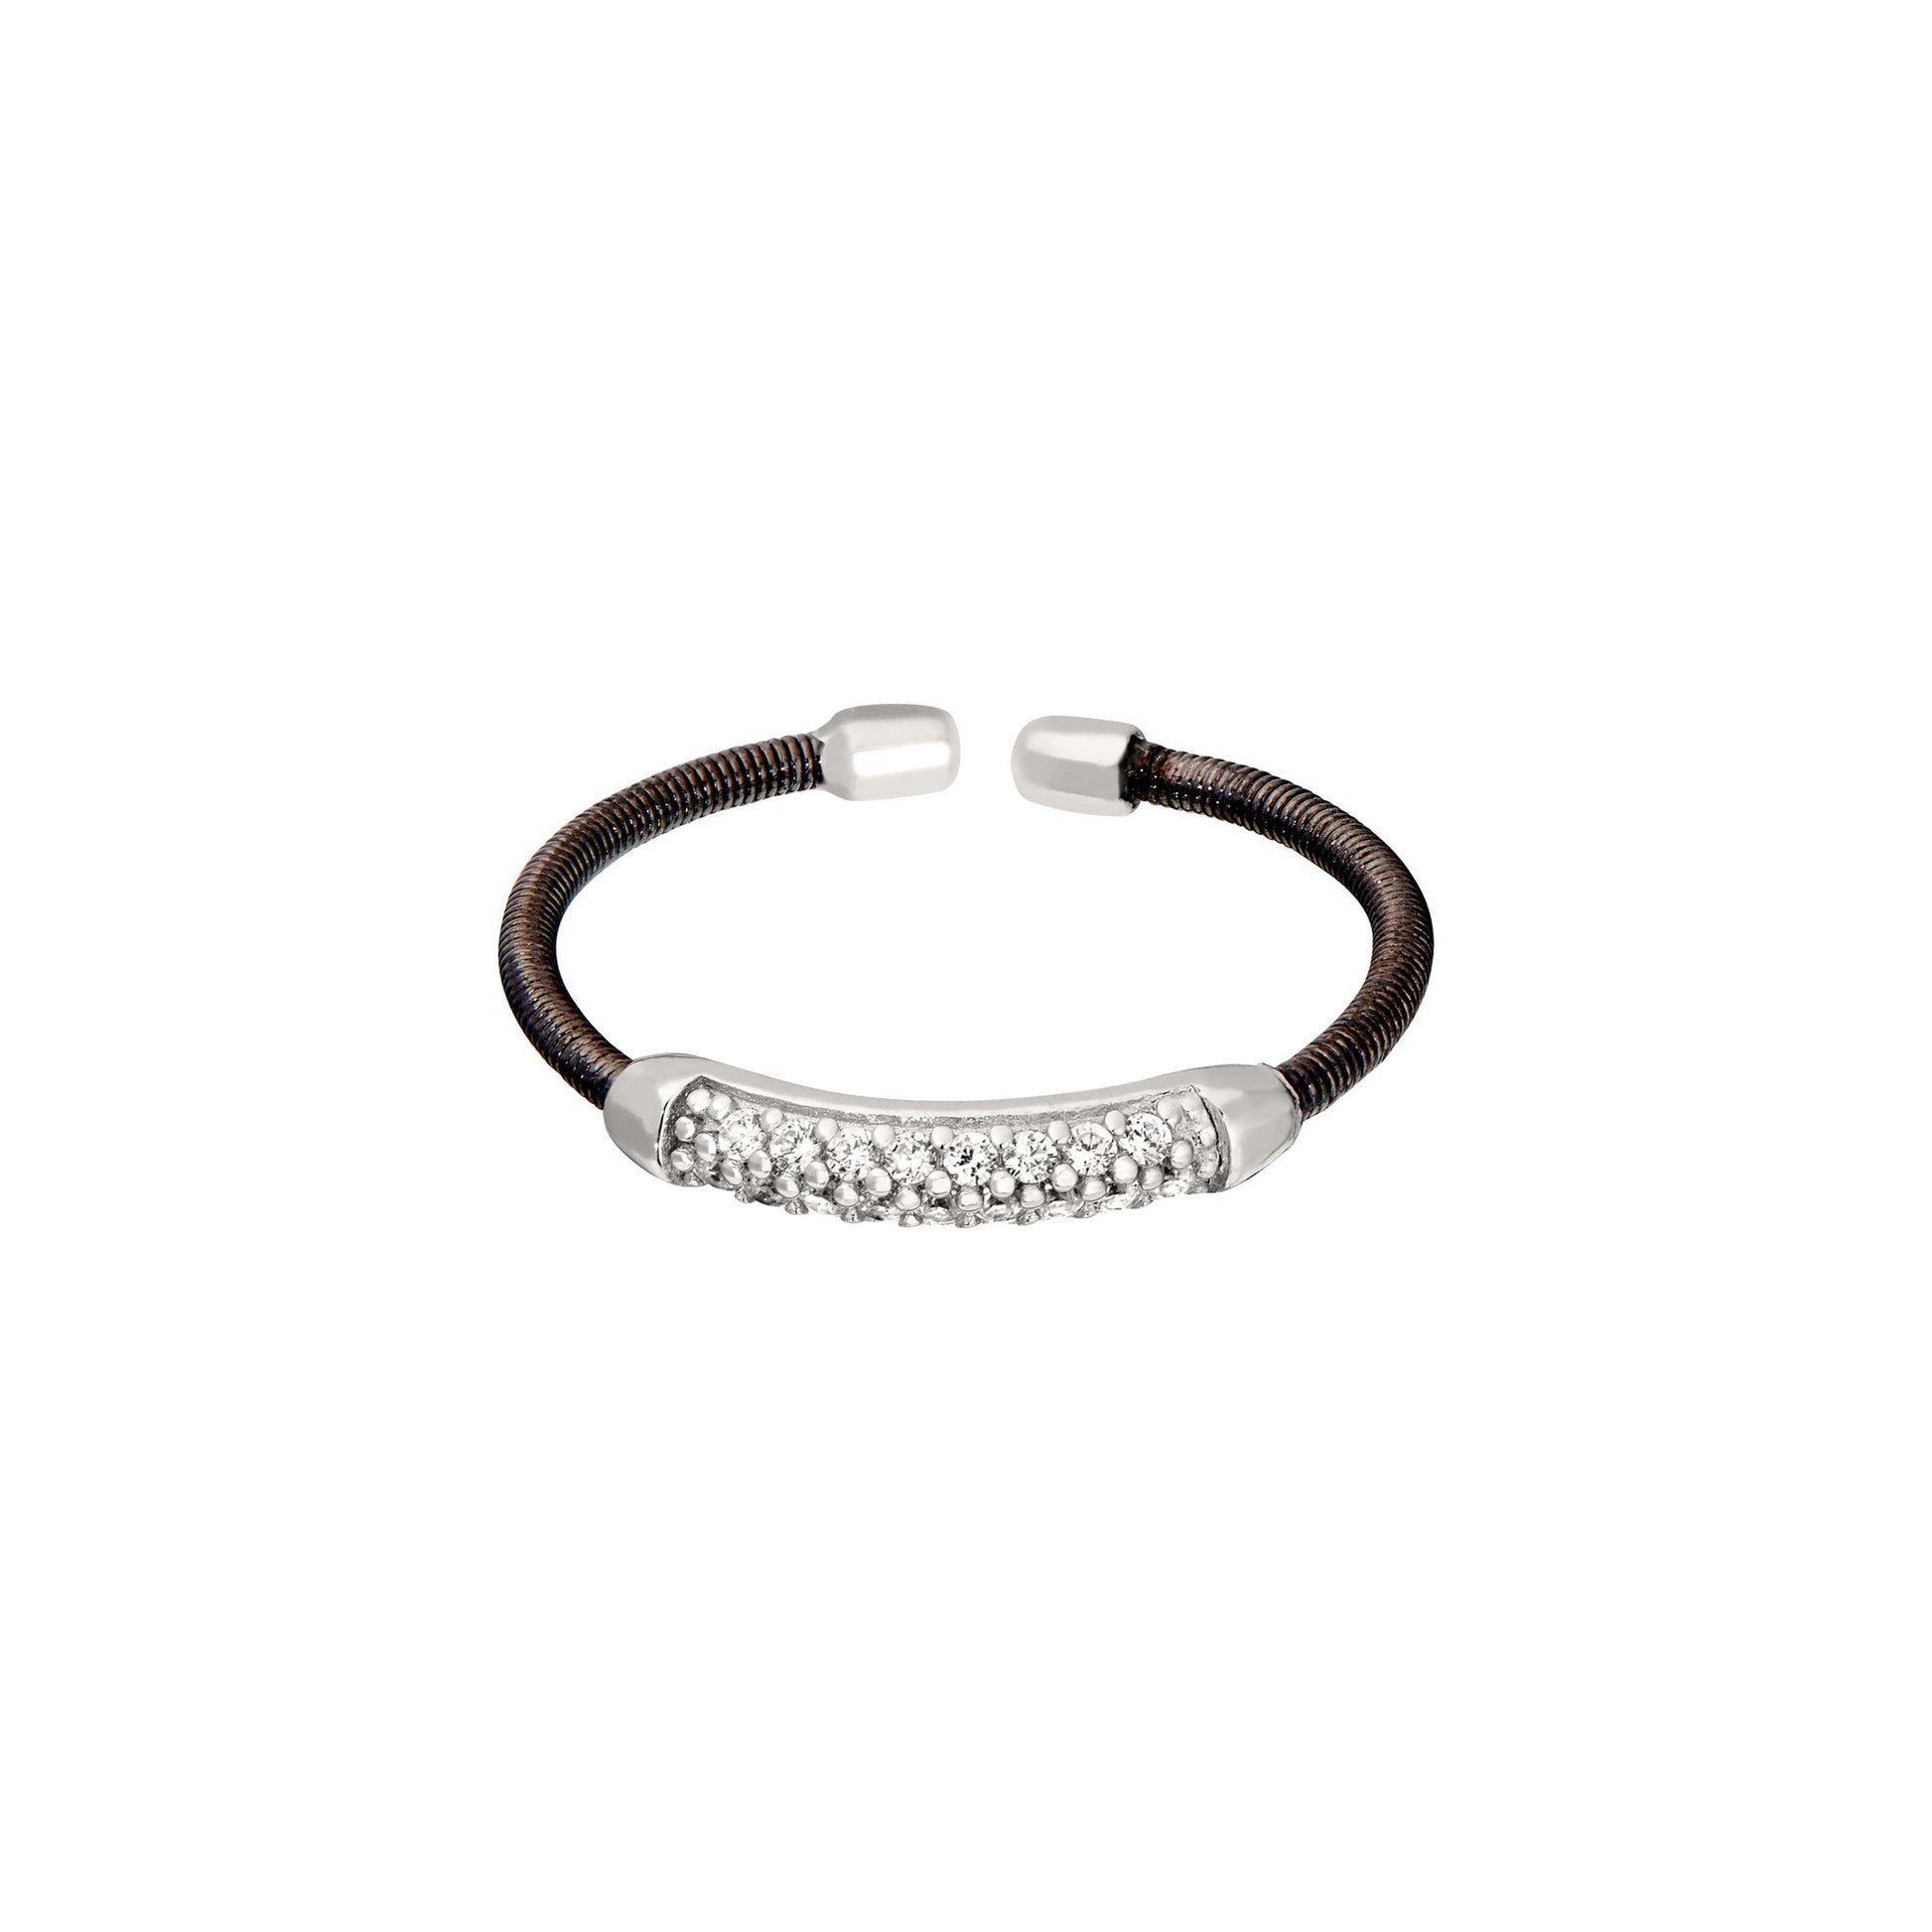 A flexible cable ring with simulated diamonds displayed on a neutral white background.